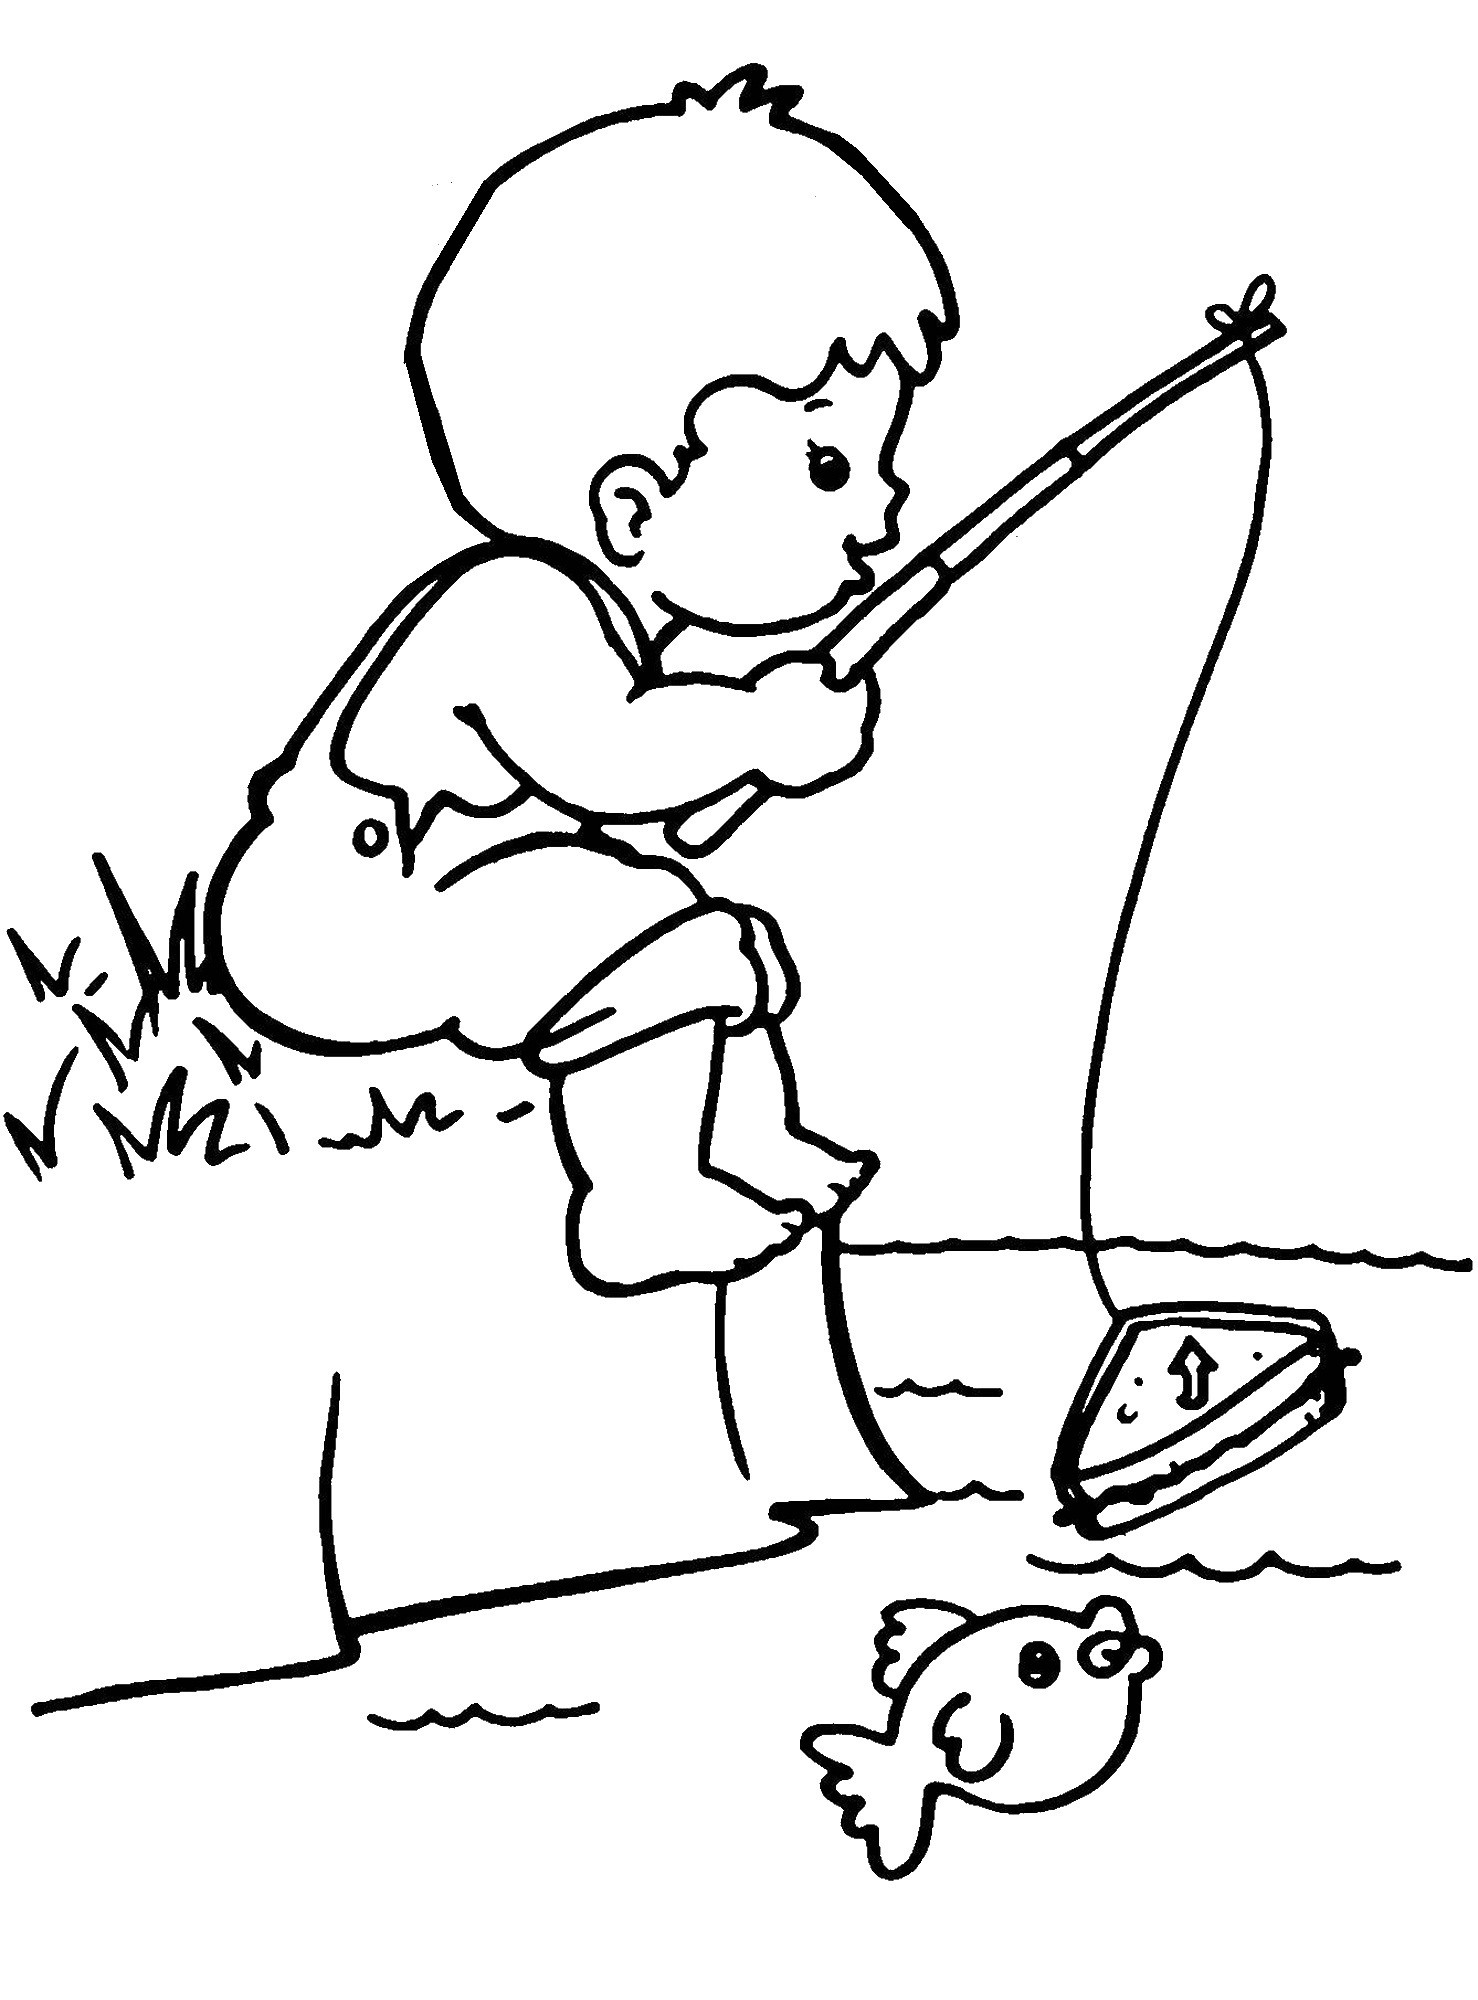 Coloring Sheets For Kids Boys
 Free Printable Boy Coloring Pages For Kids